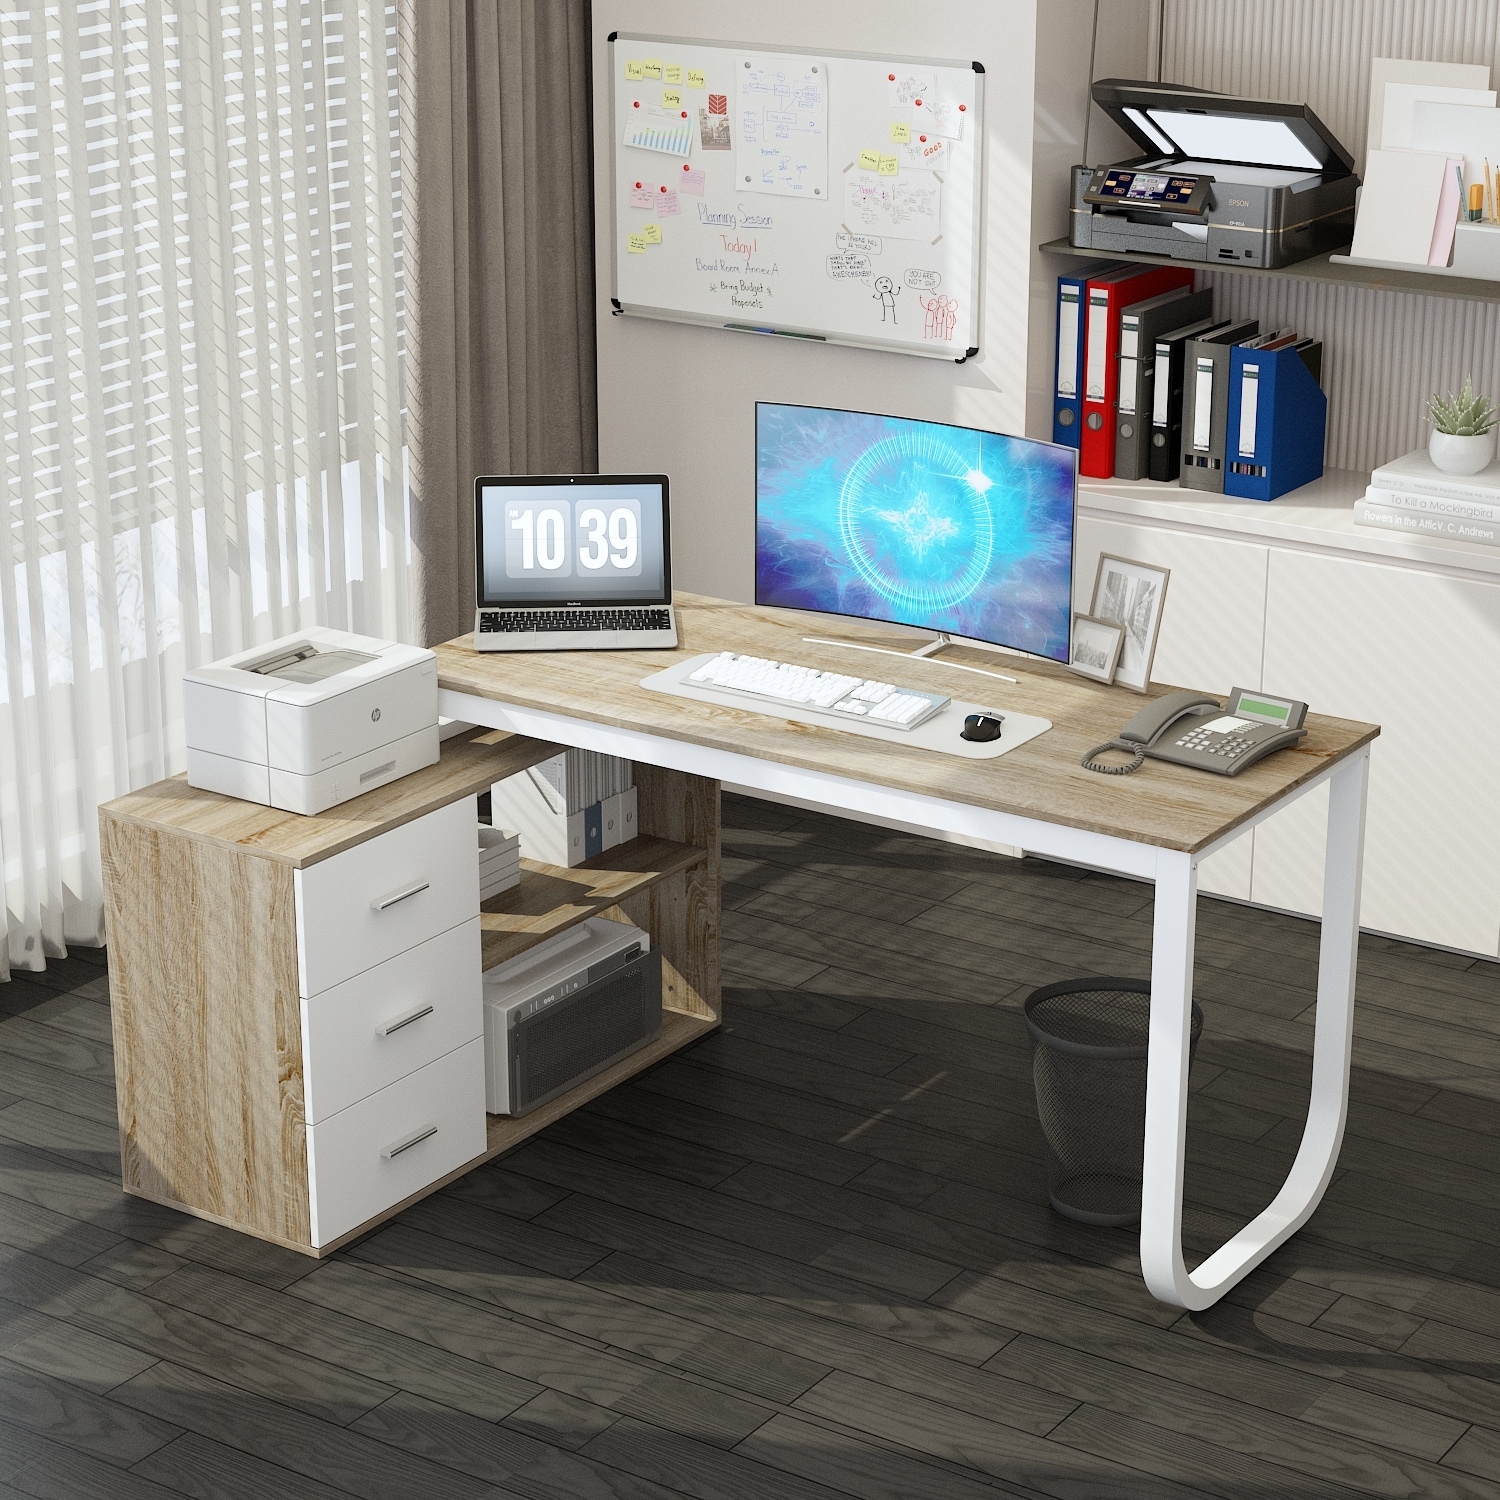 FUFU&GAGA 55.1 in. Width L-Shaped Brown Wooden 3-Drawer Commercial Desk, Computer Desk, Writing Desk with Shelves Storage